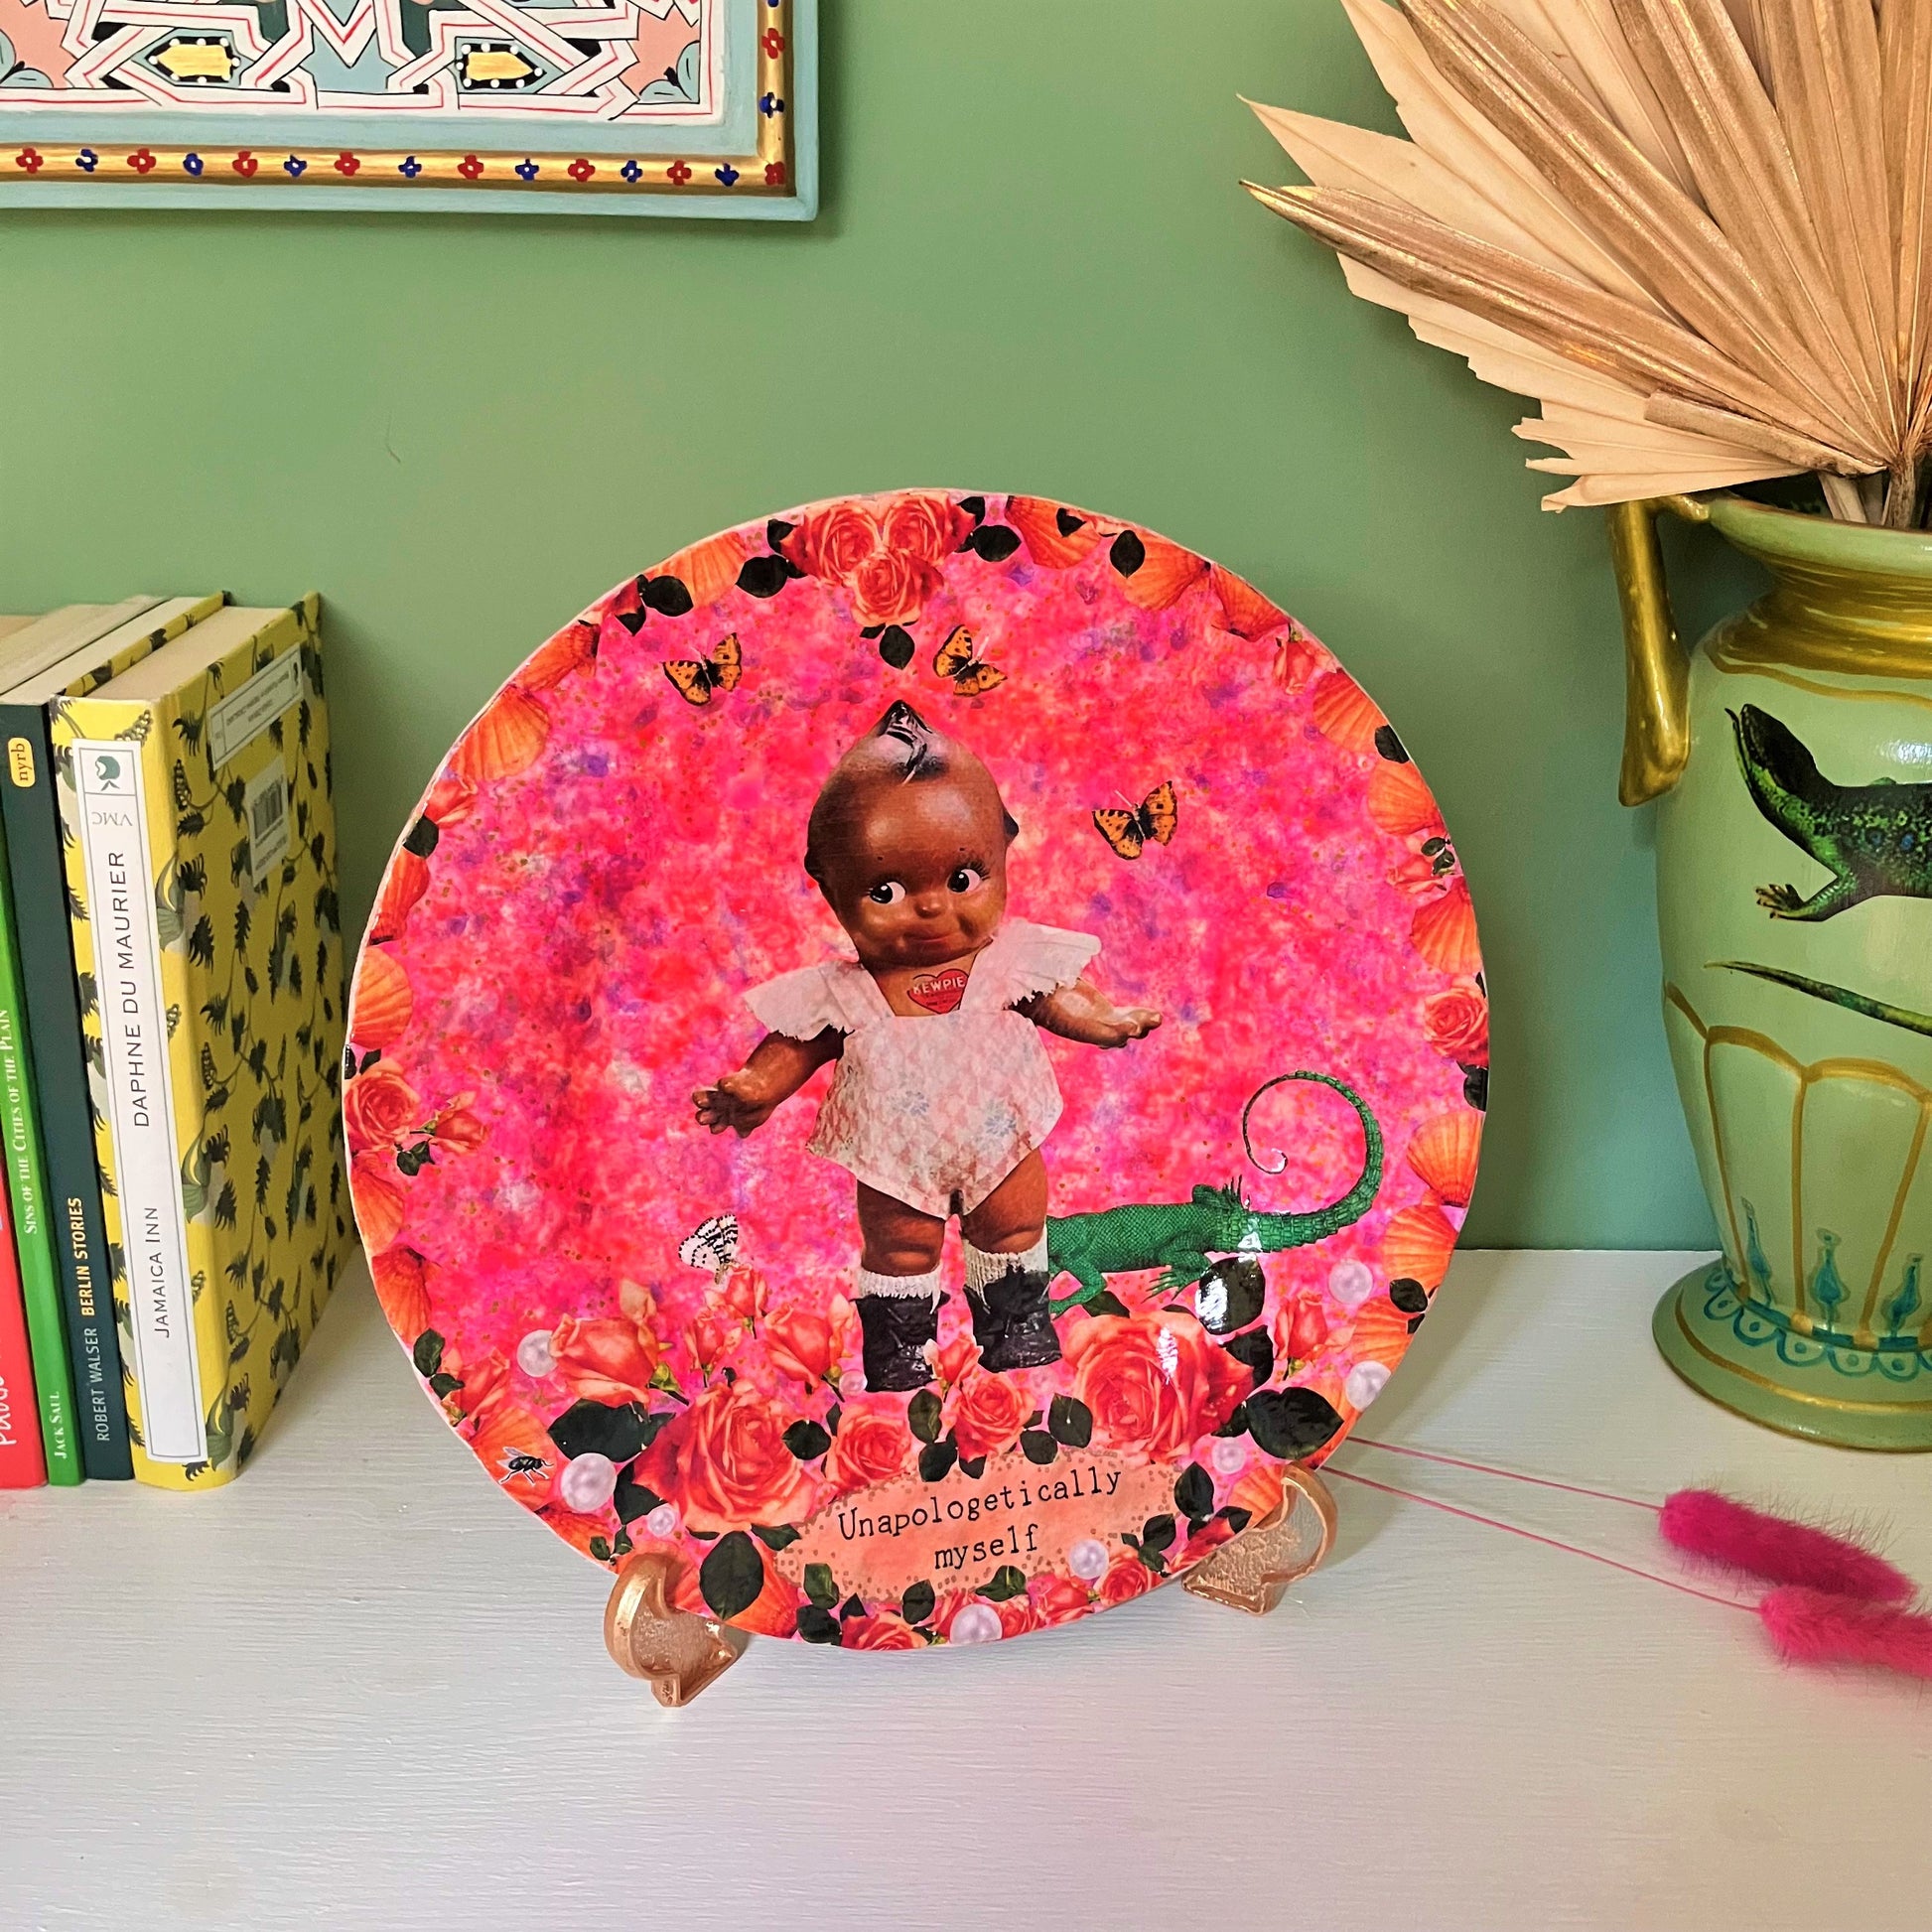 "Unapologetically Myself" Wall Plate by House of Frisson, featuring a vintage black doll surrounded by roses , pearls, moths, and a lizard, framed by shells, on a pink background. Plate on a plate stand, resting on a shelf.